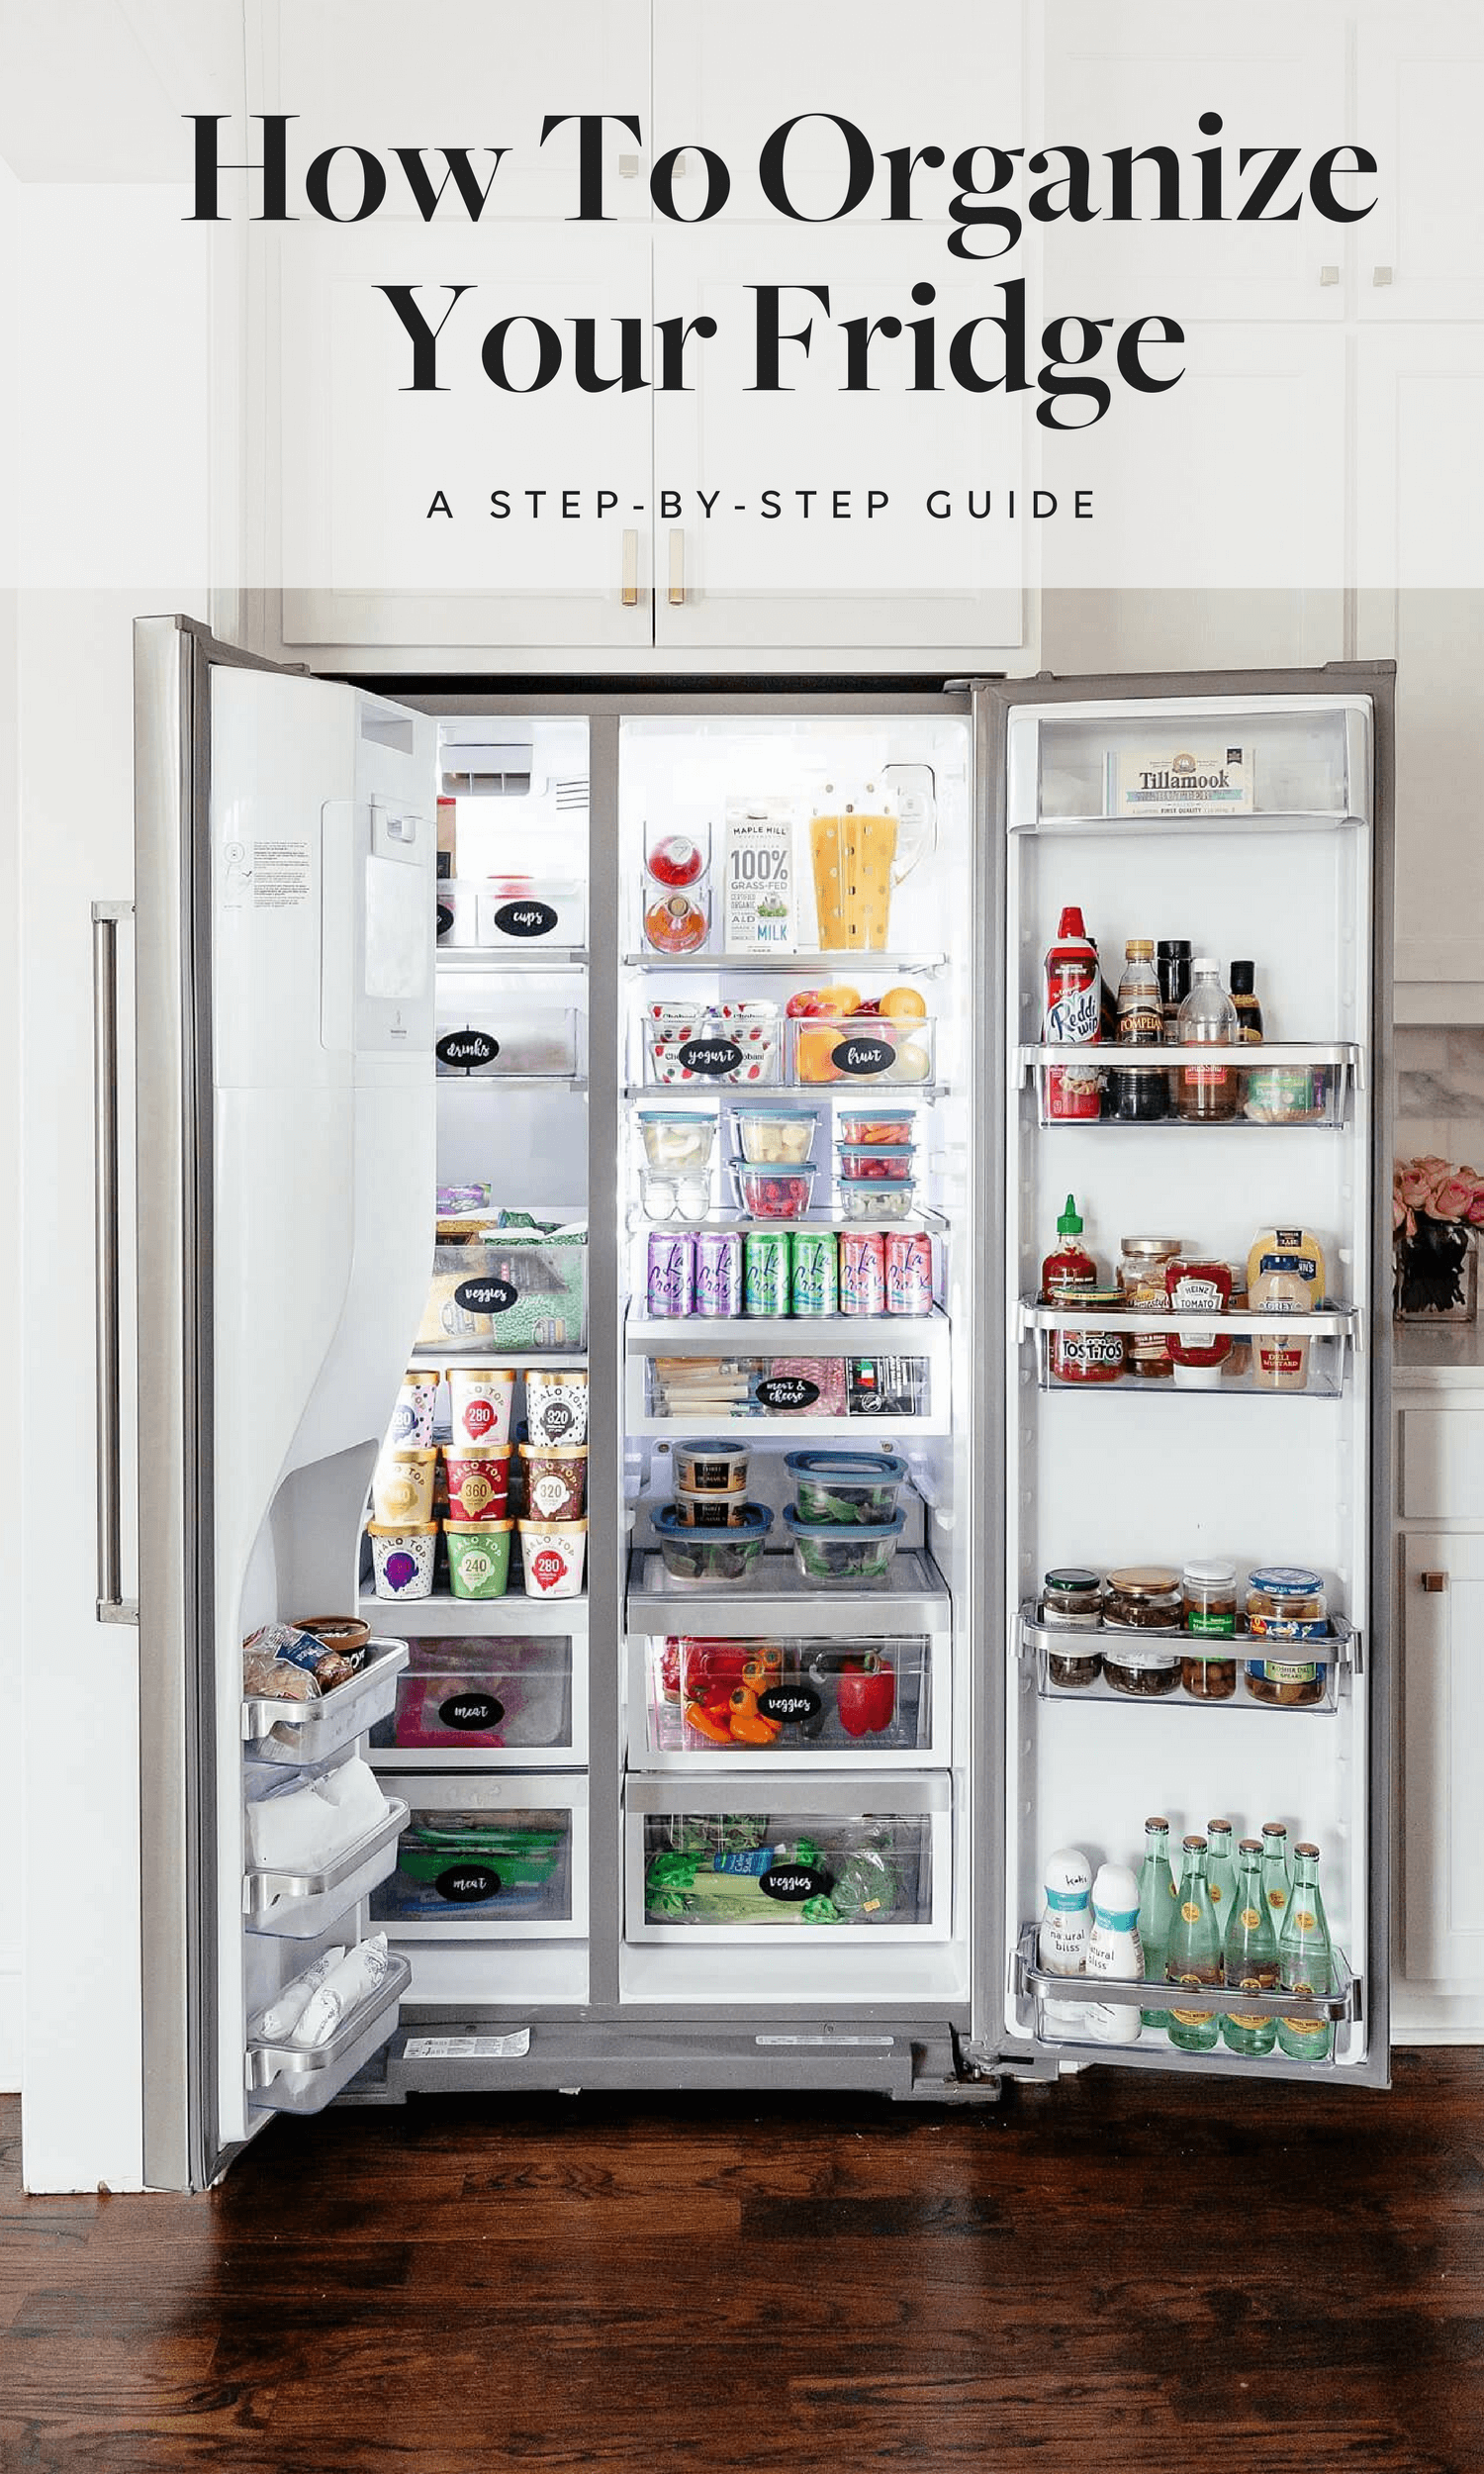 https://www.brightontheday.com/wp-content/uploads/2018/03/how-to-organize-your-fridge-pinterest-image.png